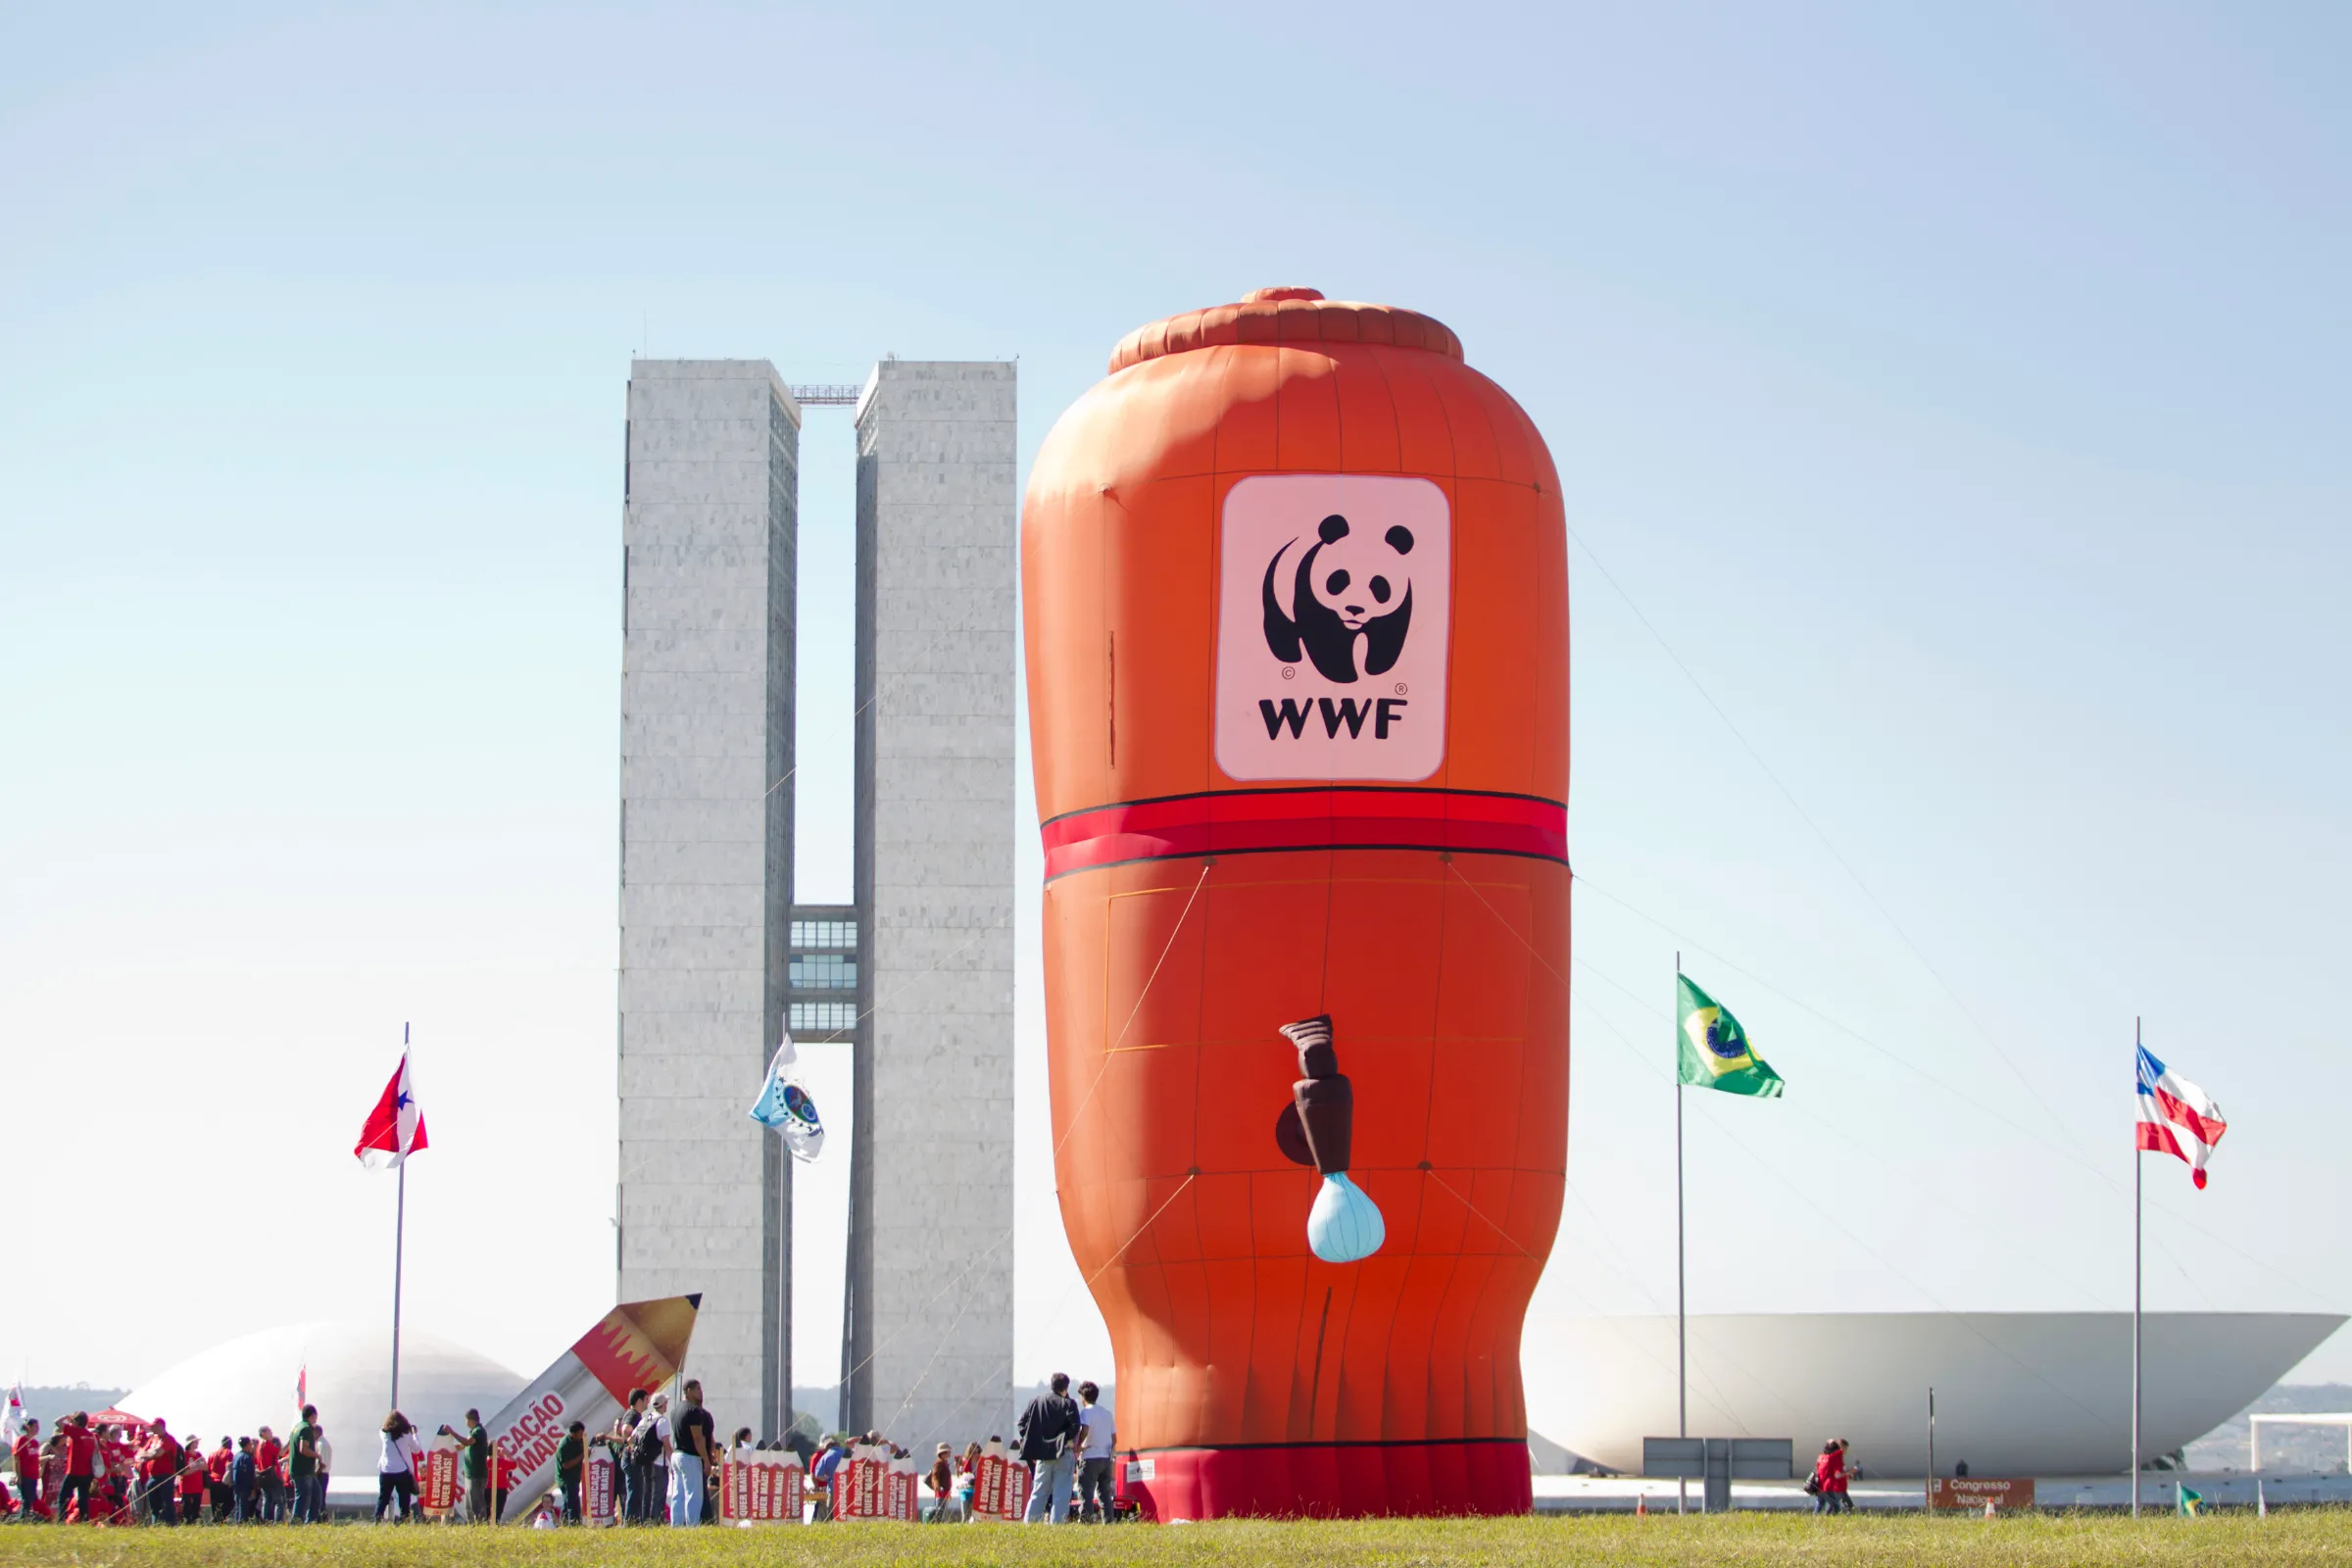 WWF members set up a balloon shaped like a water filter in front of the Brazilian National Congress, to call attention to the voting of the reform of the forestry code, in Brasilia May 11, 2011. The Forestry Code, which sets the percentage of native forest farmers must preserve, could significantly increase agricultural costs as farmers will have to reforest or invest in protected areas.